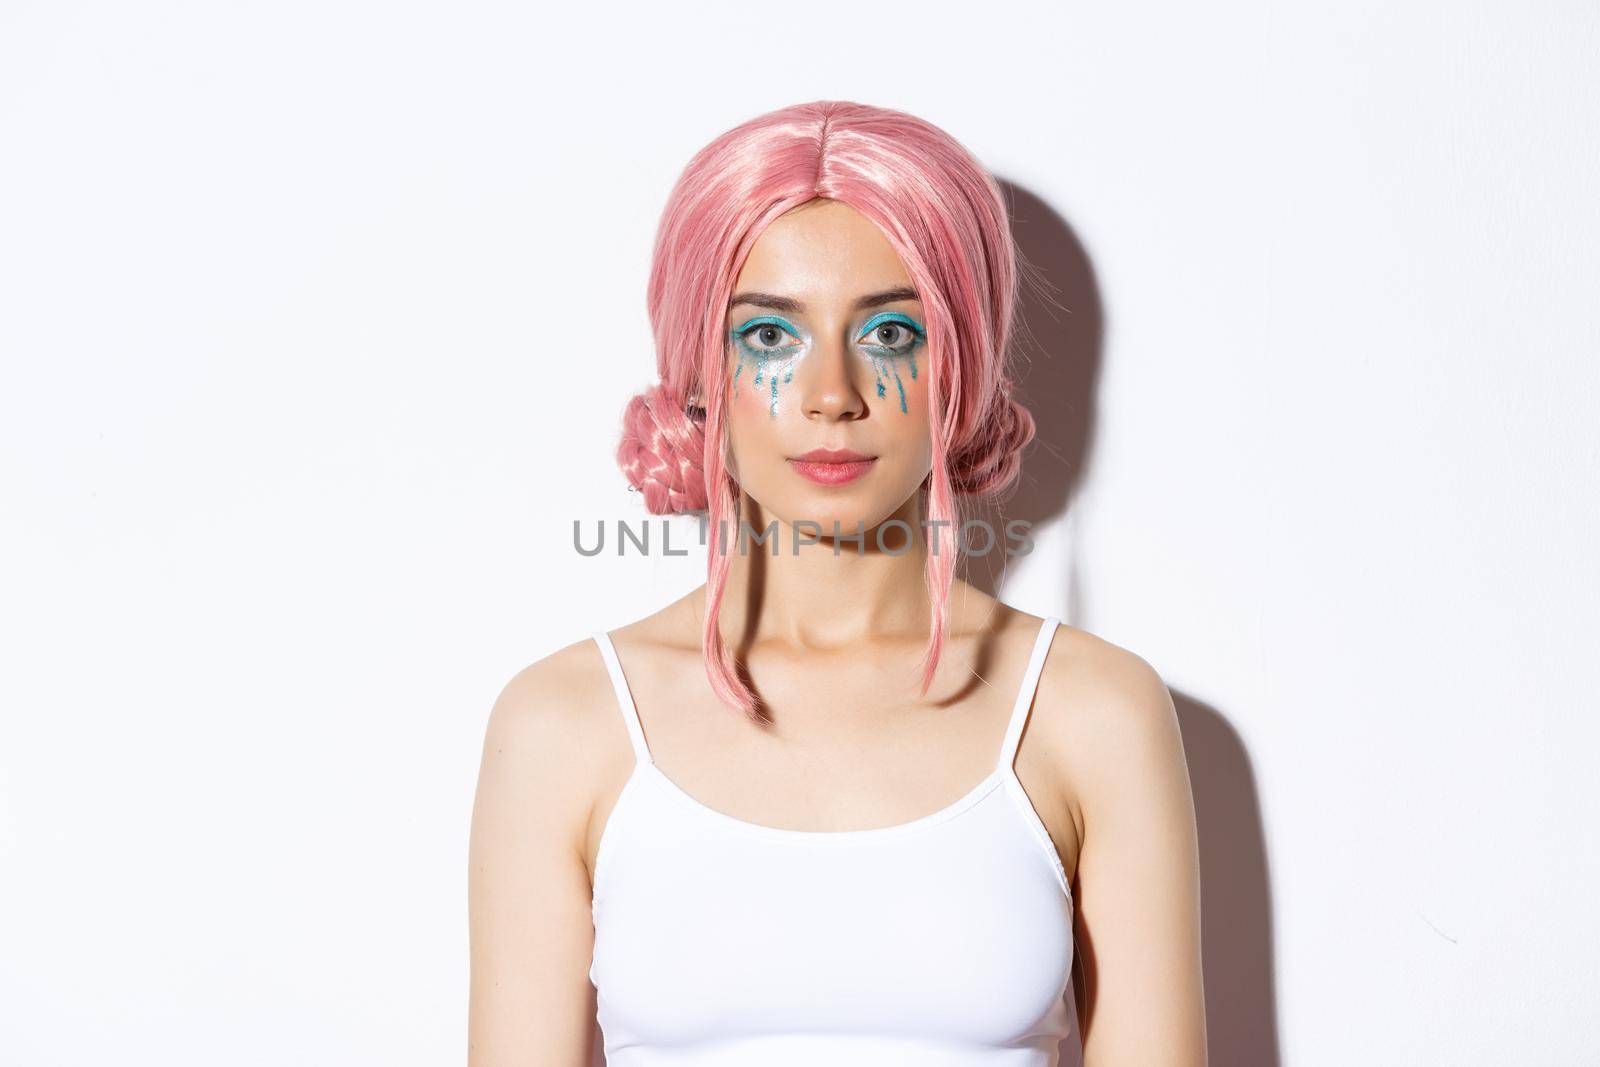 Close-up of beautiful woman celebrating halloween in costume of fairy, with pink wig and bright makeup, standing over white background.